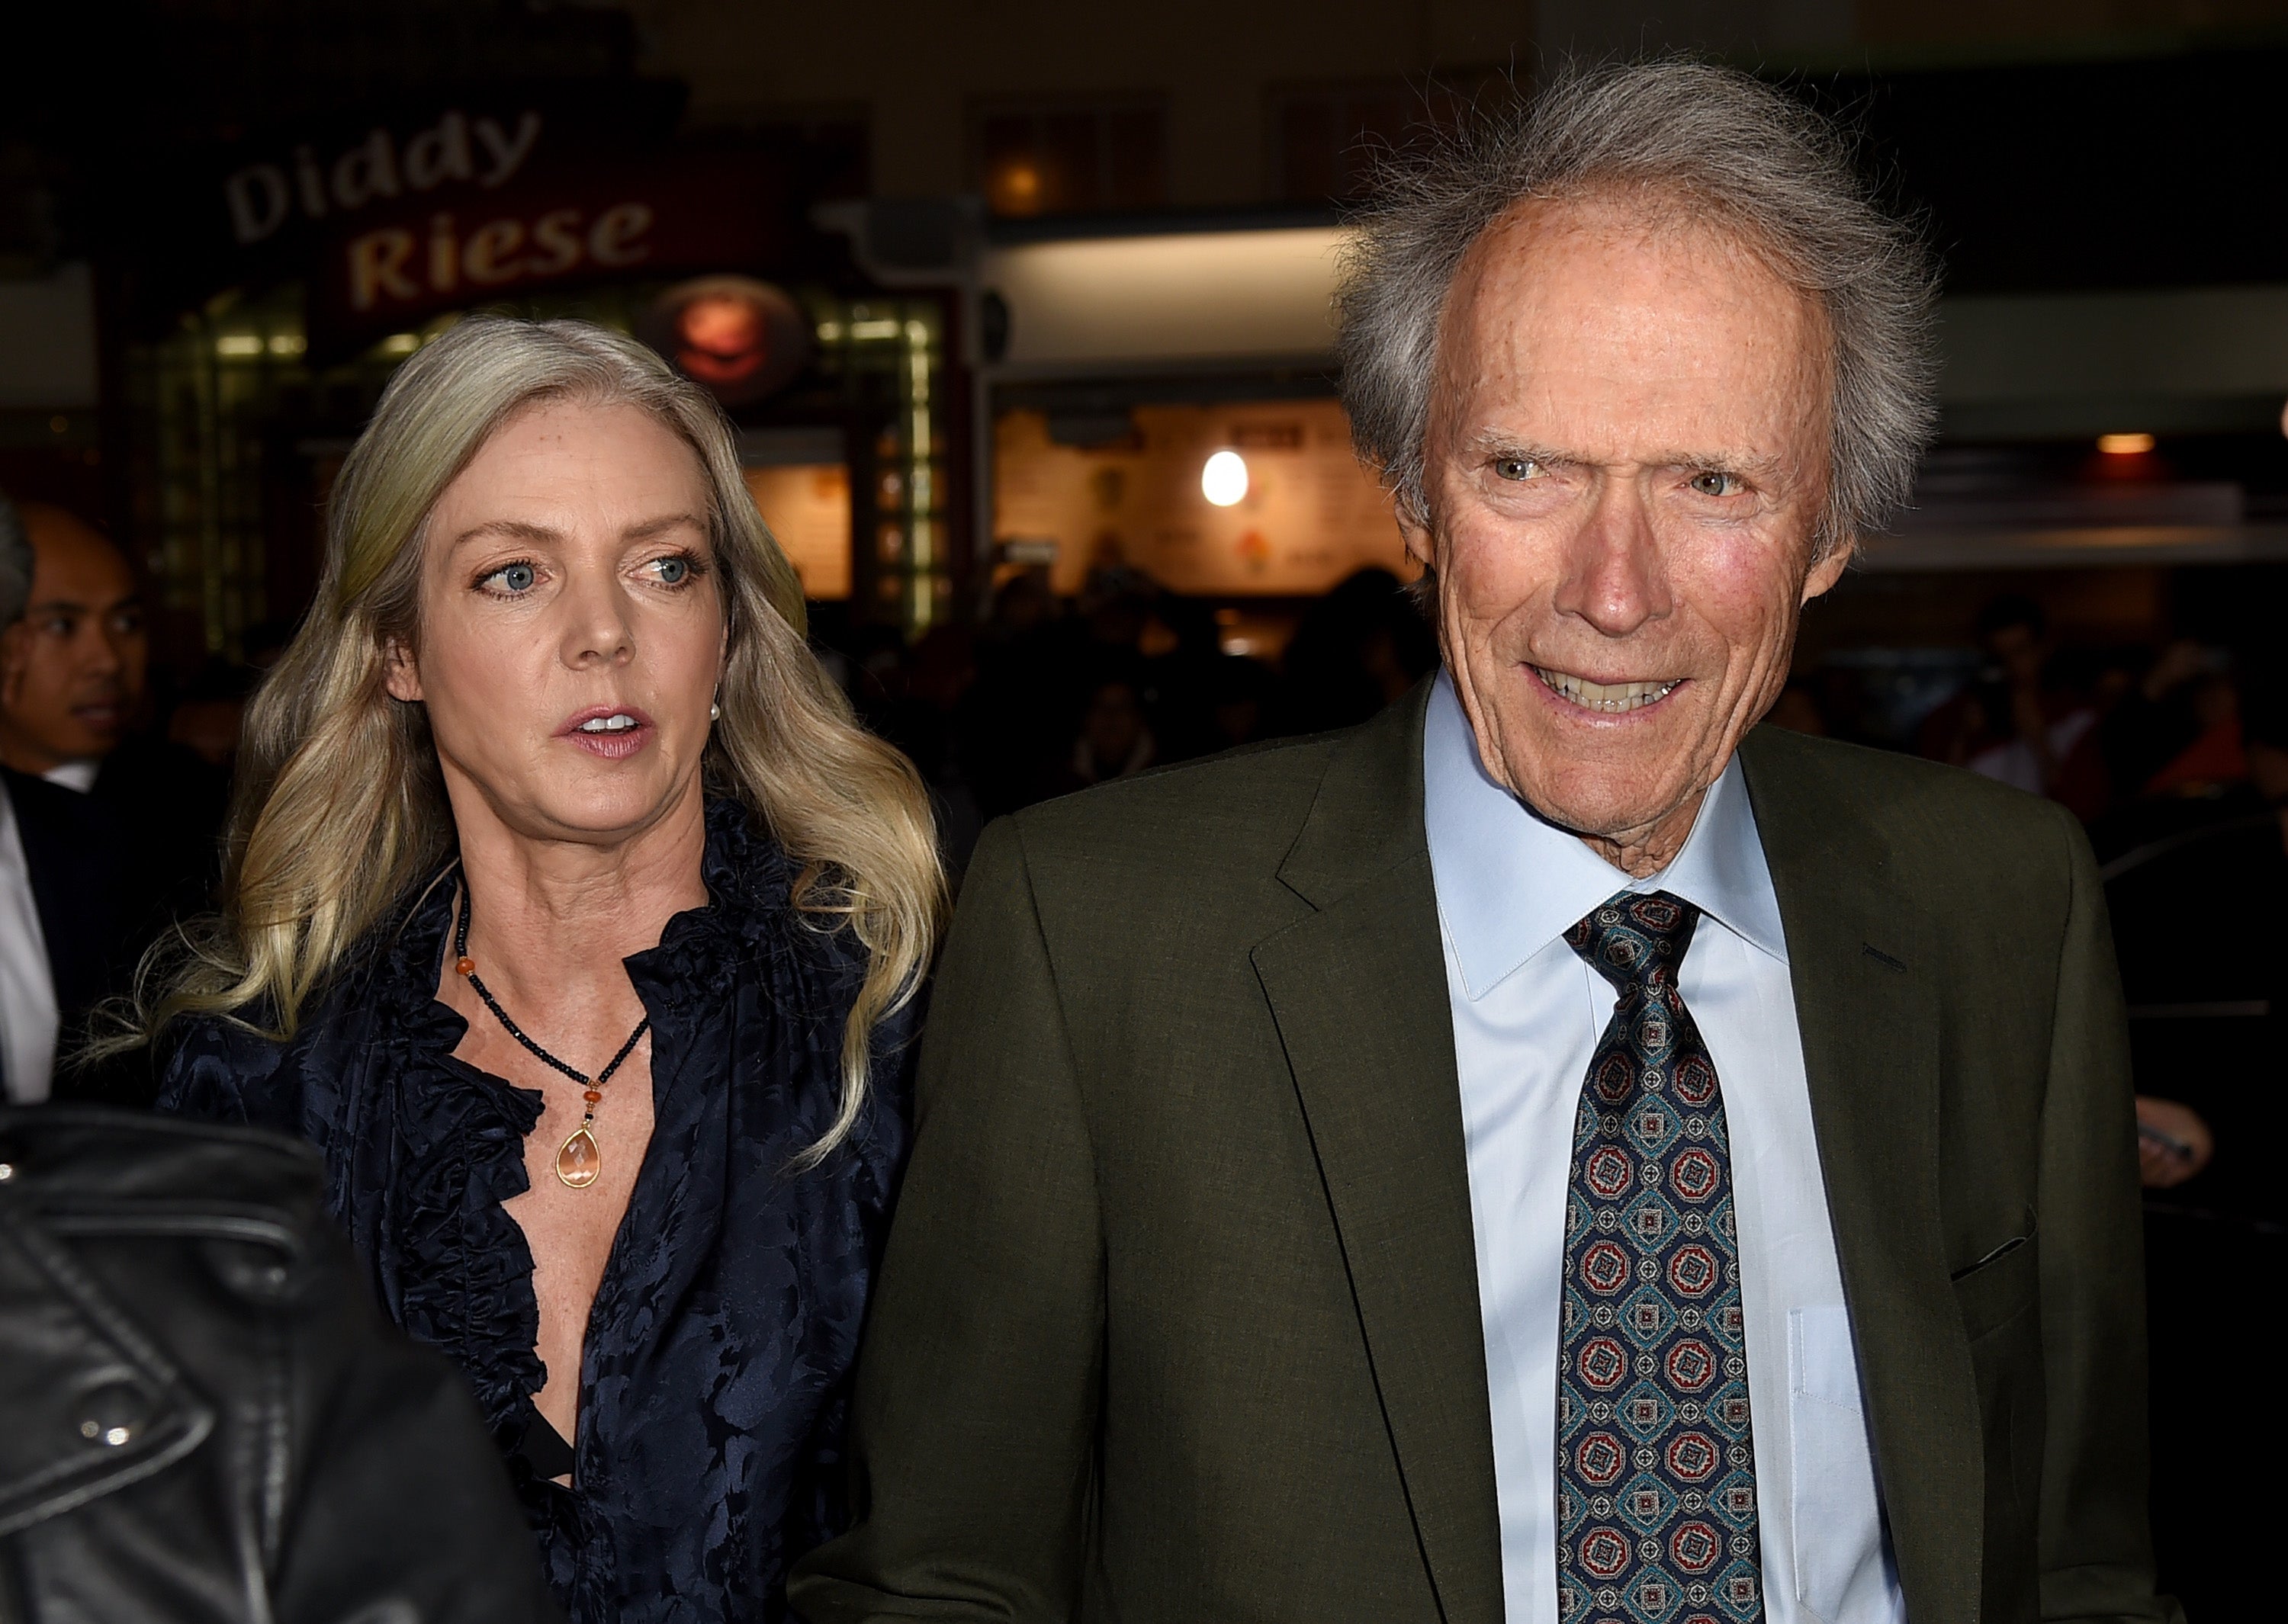 Christina Sandera and Clint Eastwood have been together since 2014